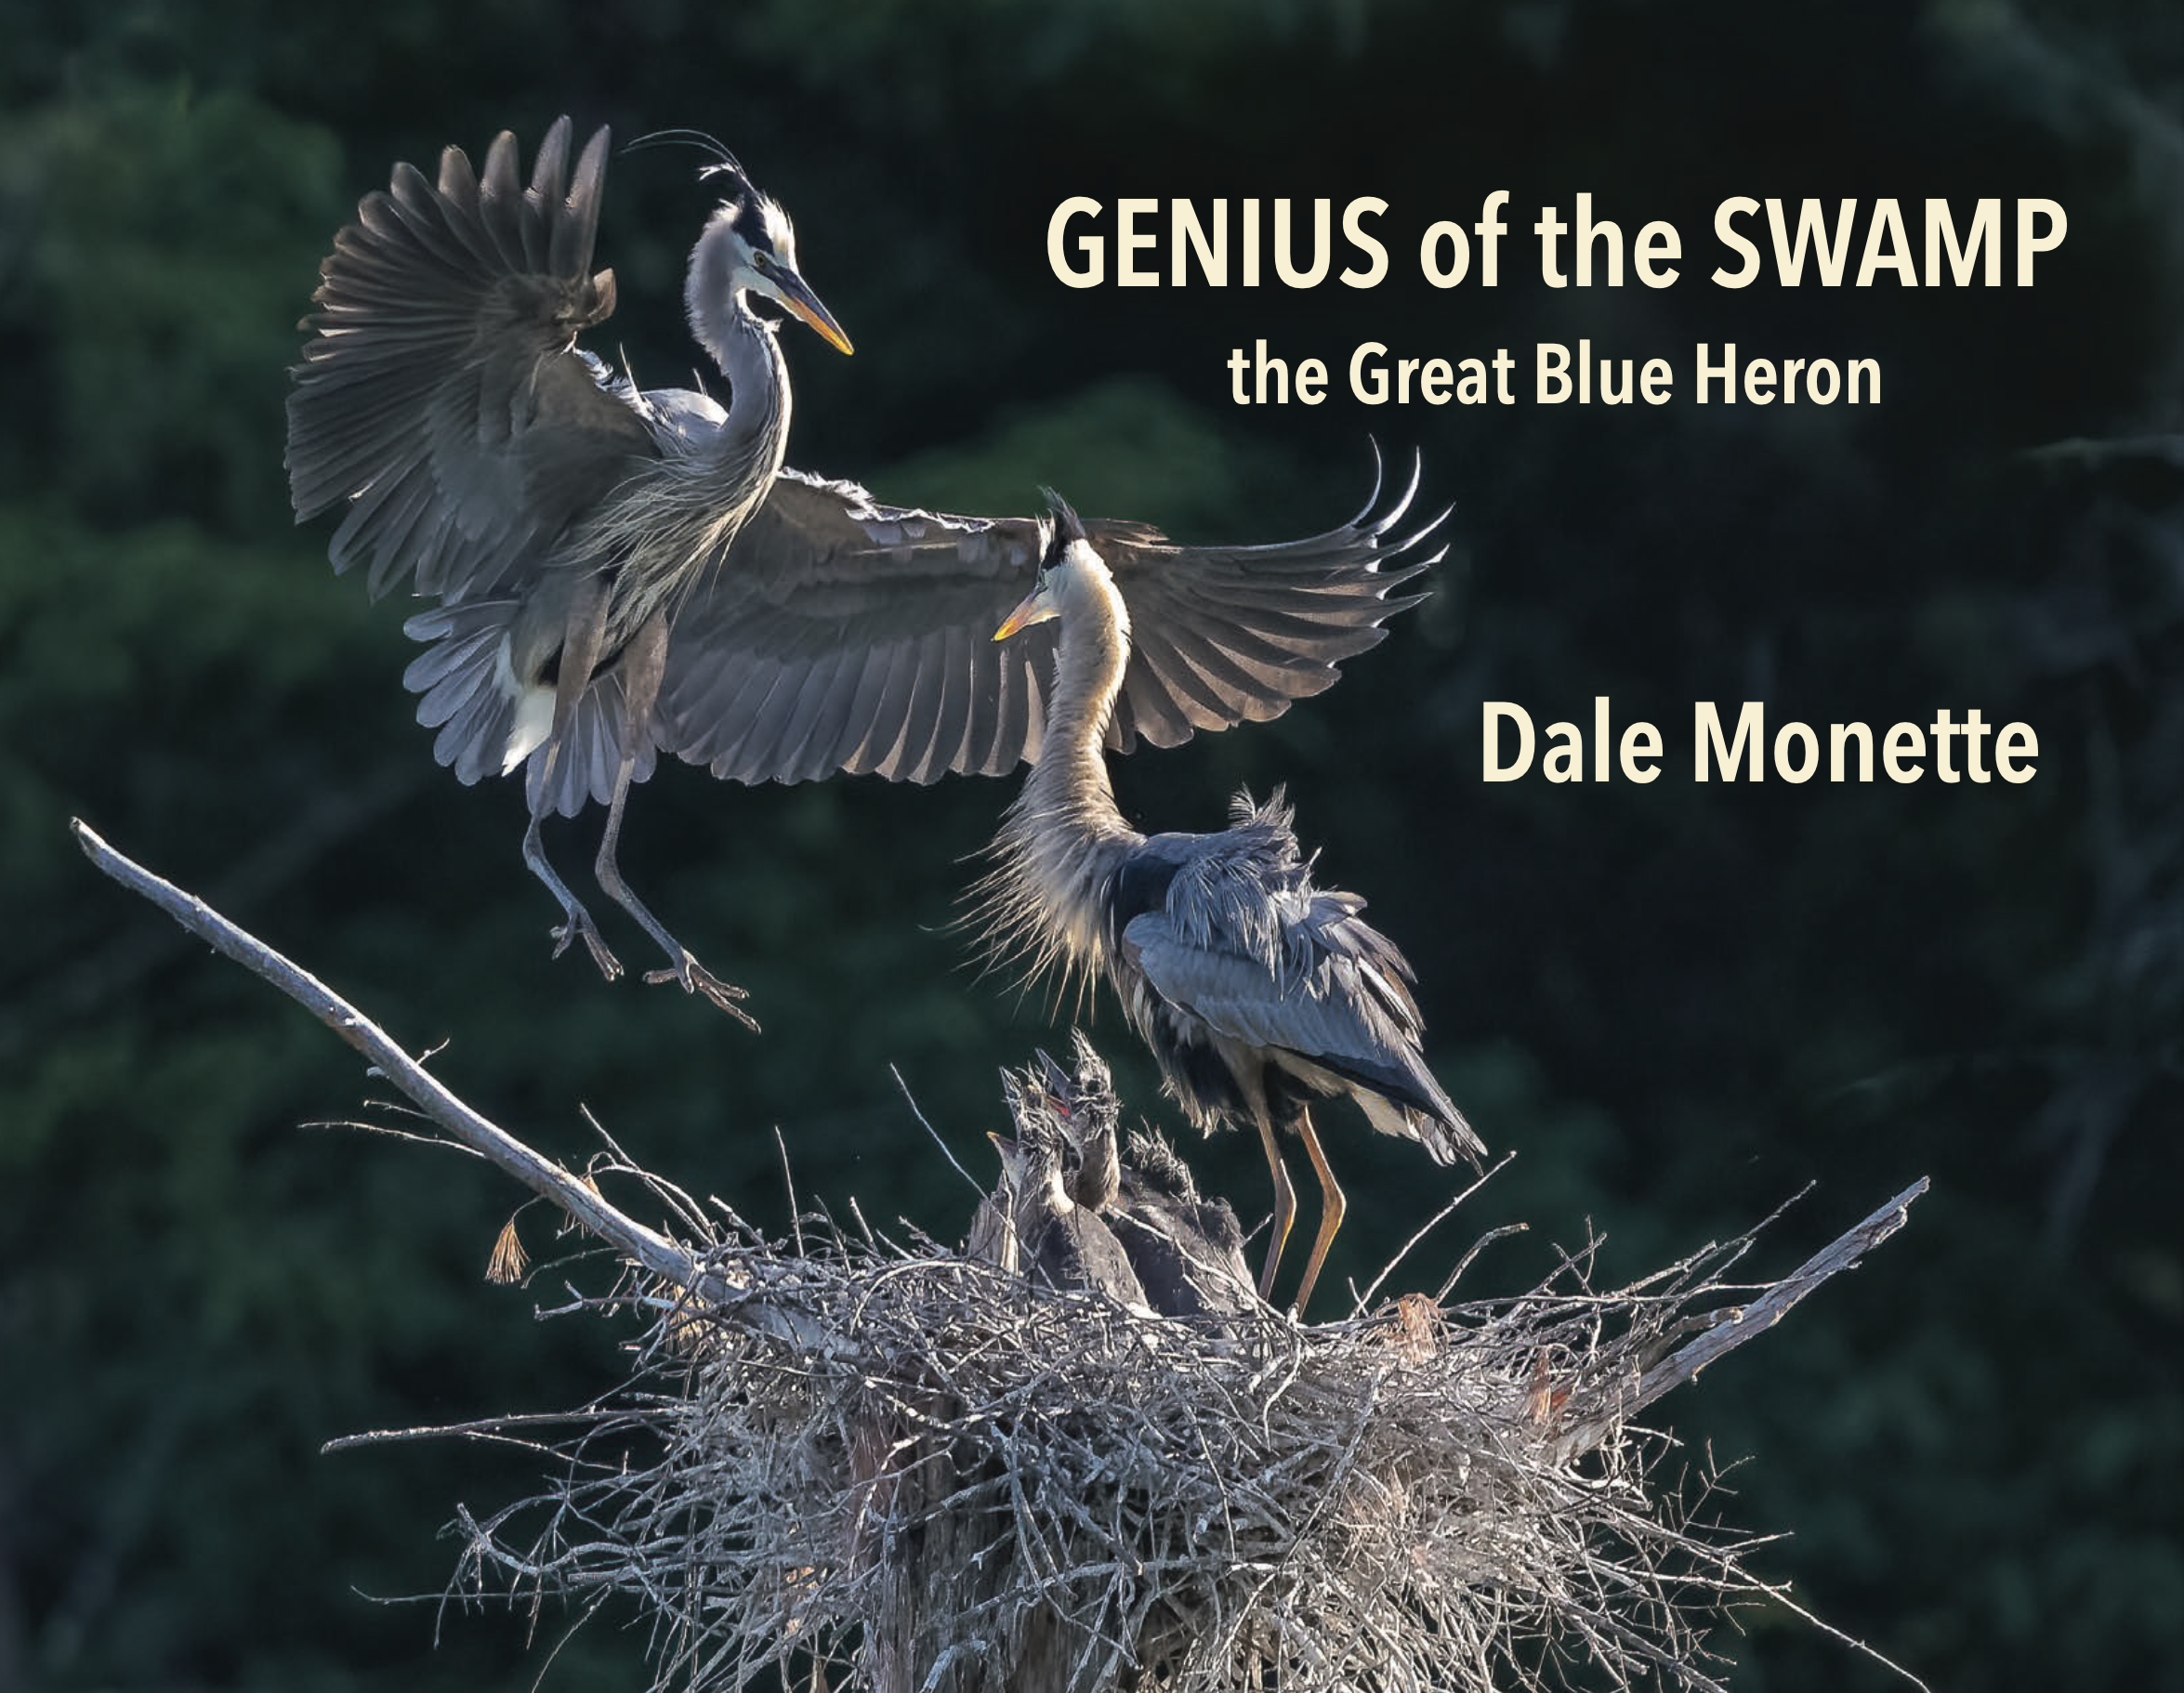   IT’S RELEASED !    Book number three.  Three years in the making Great blue herons and their relationships with beavers and other critters they share their ponds with.  